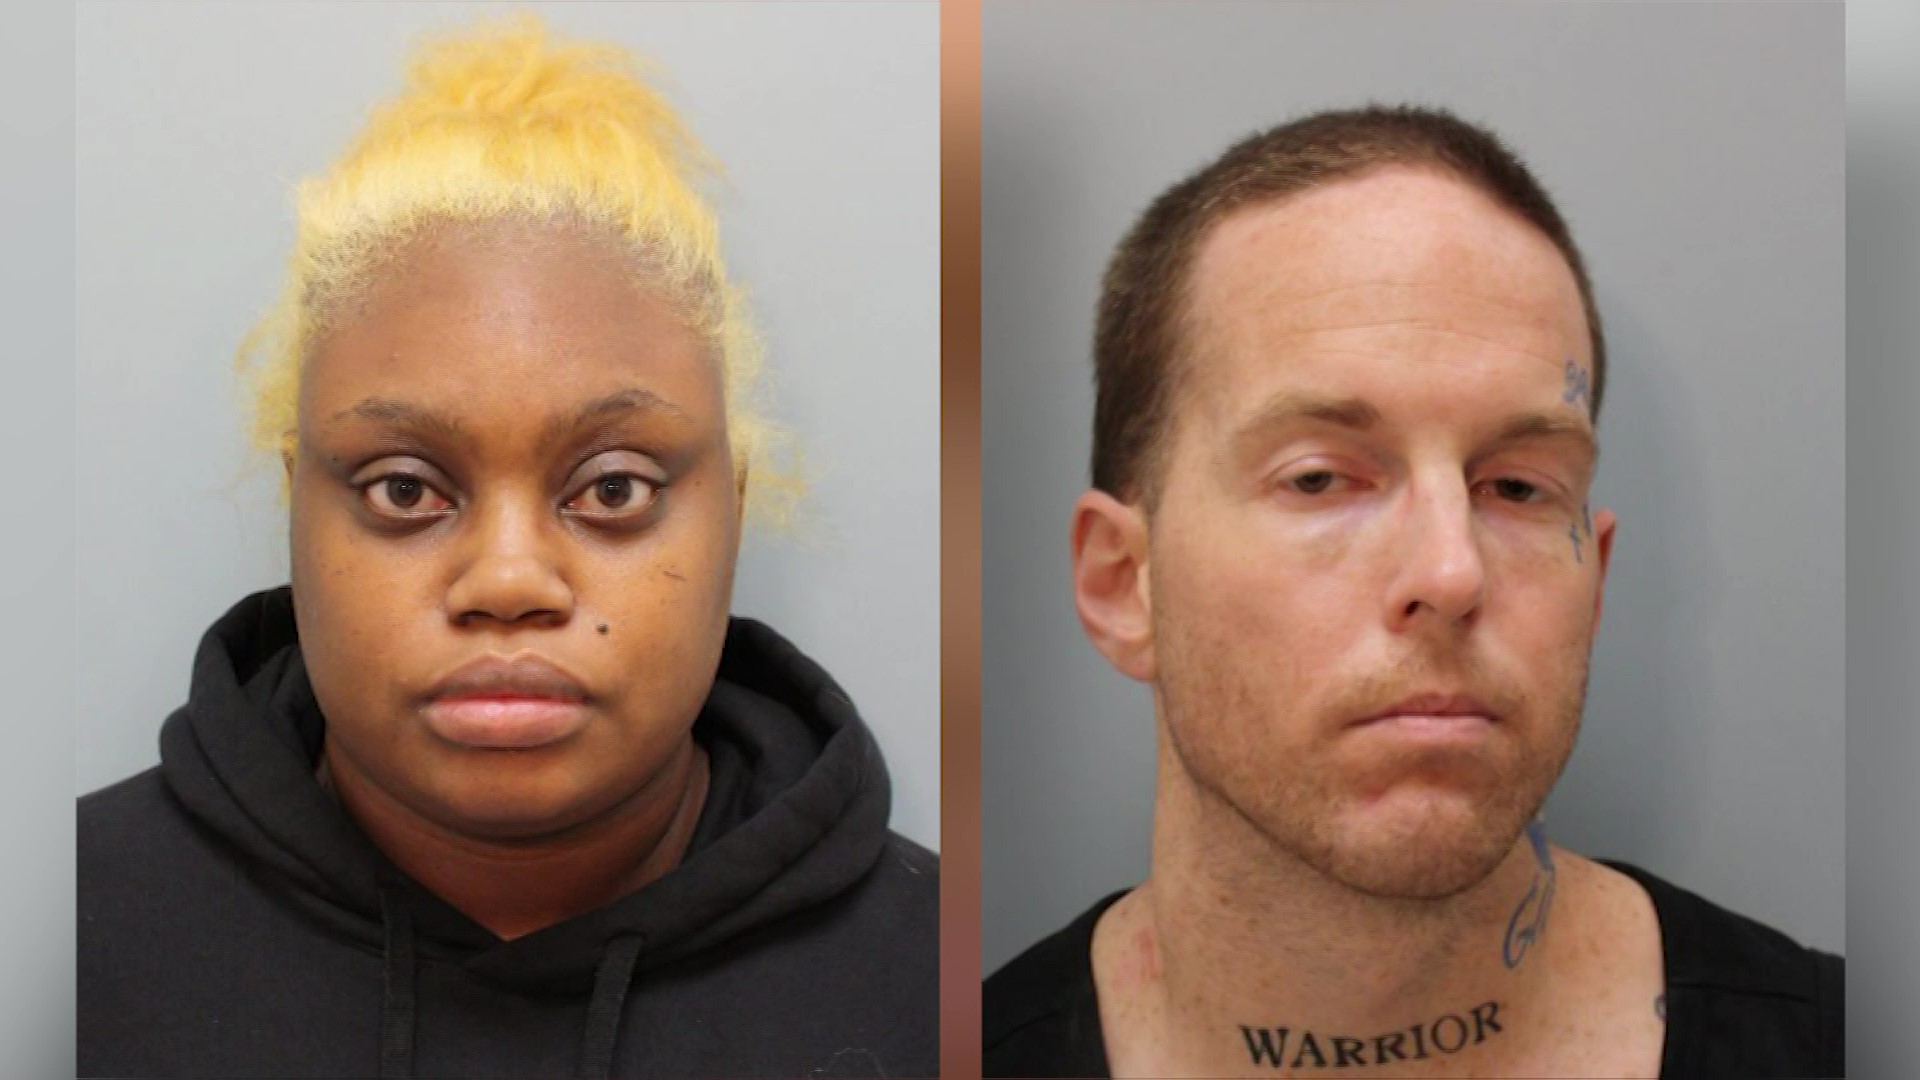 Mom and boyfriend charged after 3 children found abandoned in apartment with another childs remains pic